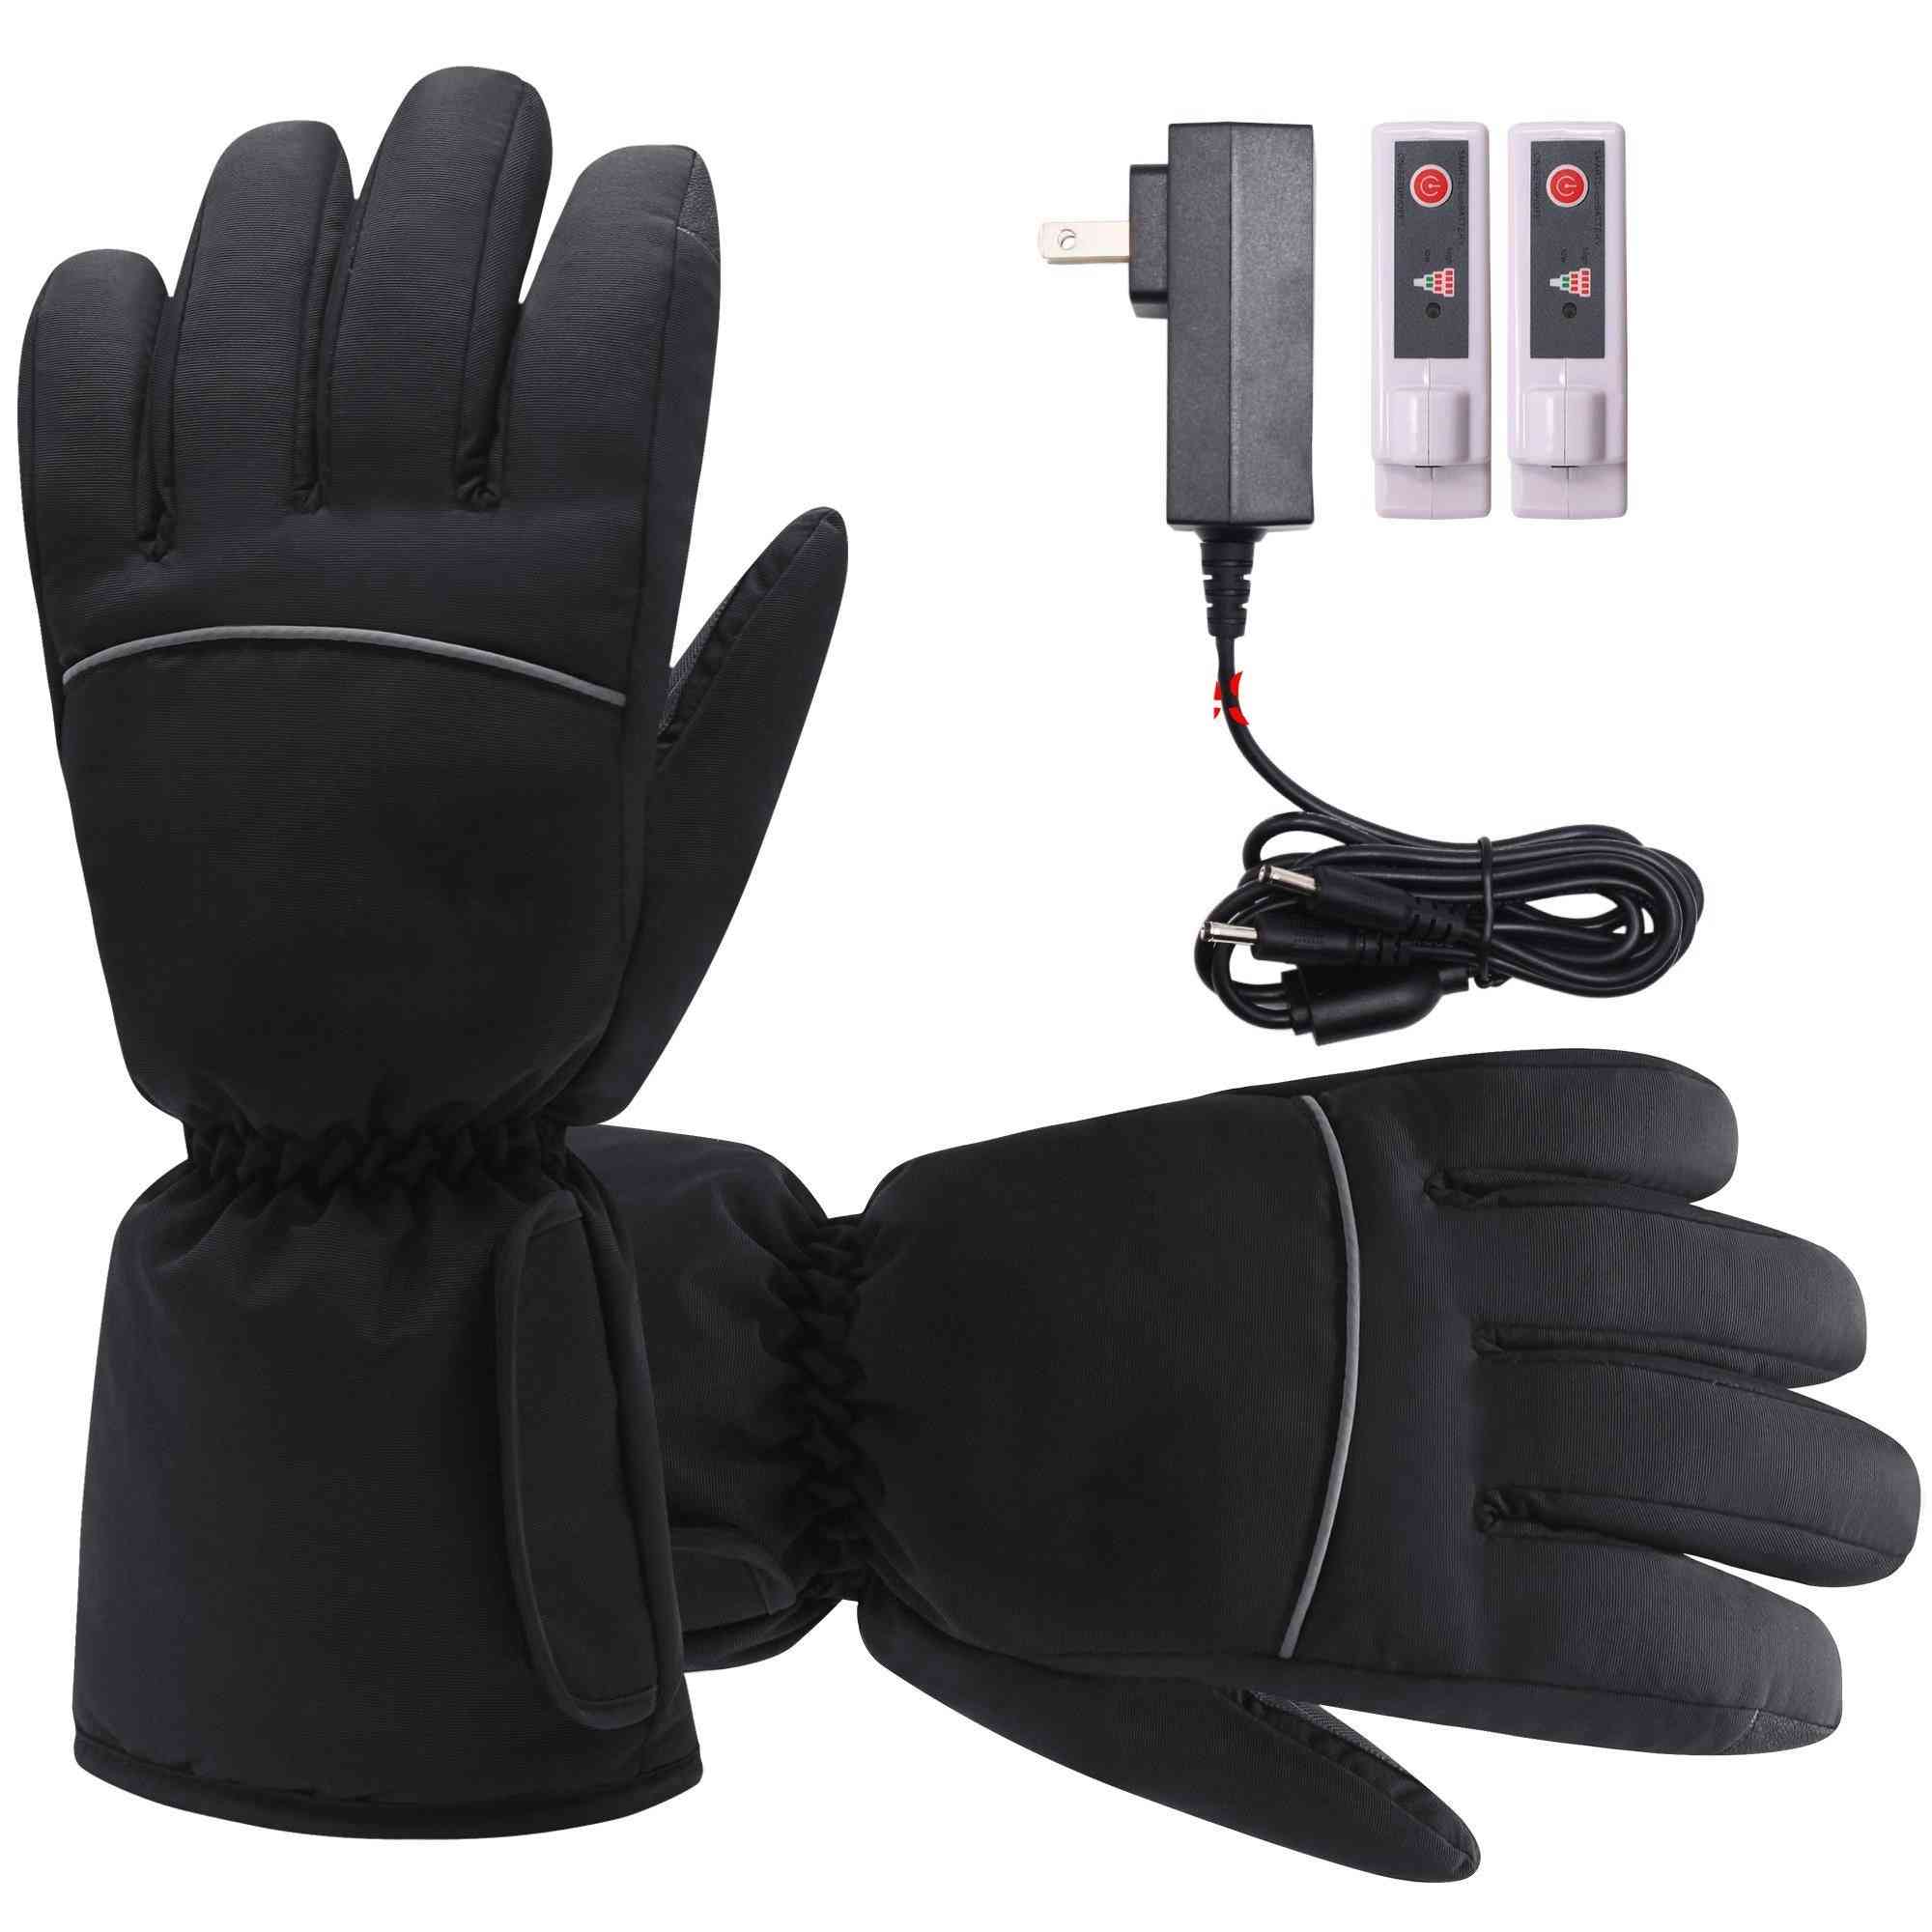 Rechargeable Batteries For Electric Heated Socks, Heating Gloves